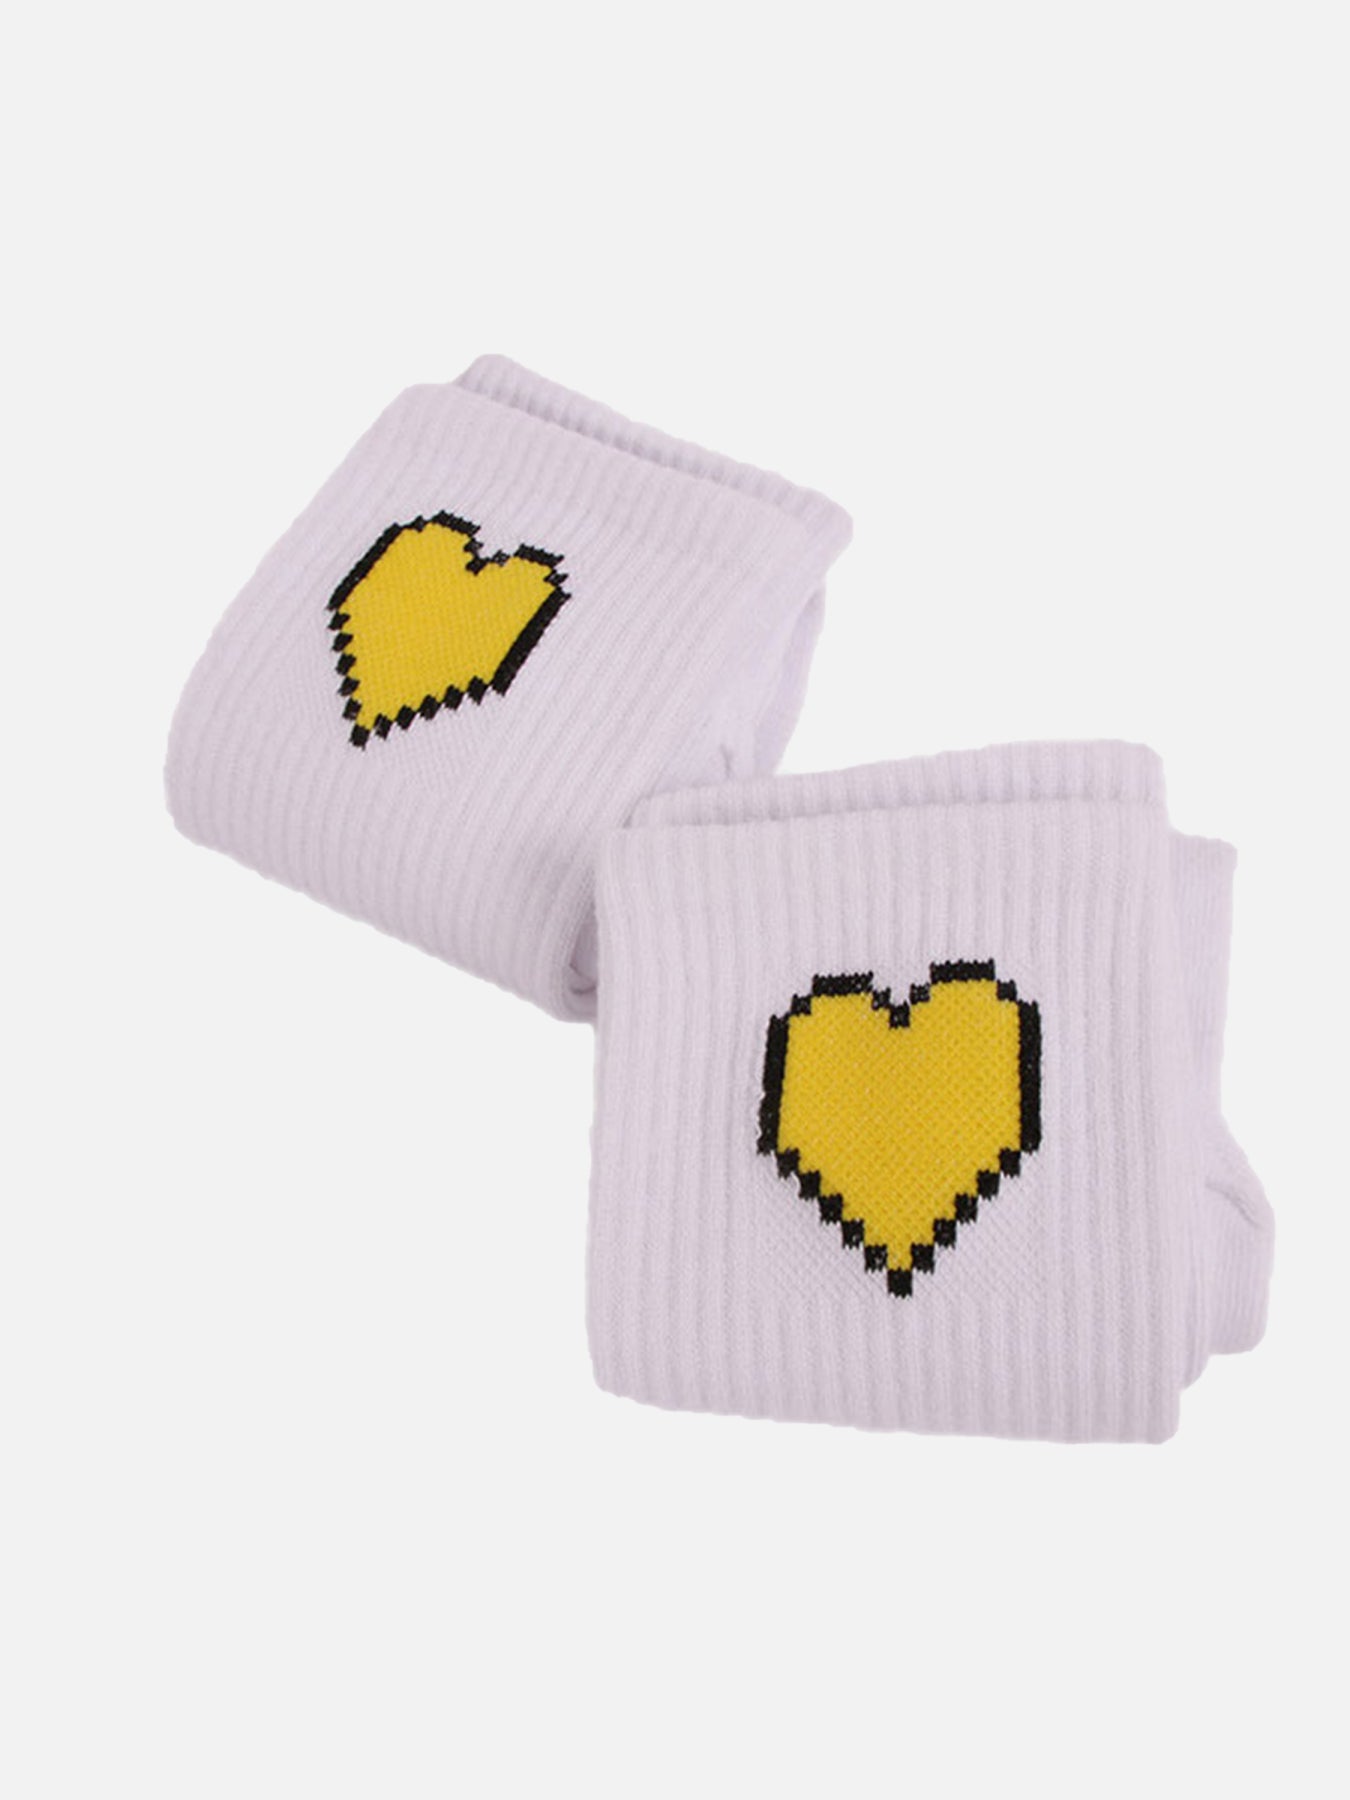 The Supermade Hip-hop Fun Love Heart Long Socks For Couples